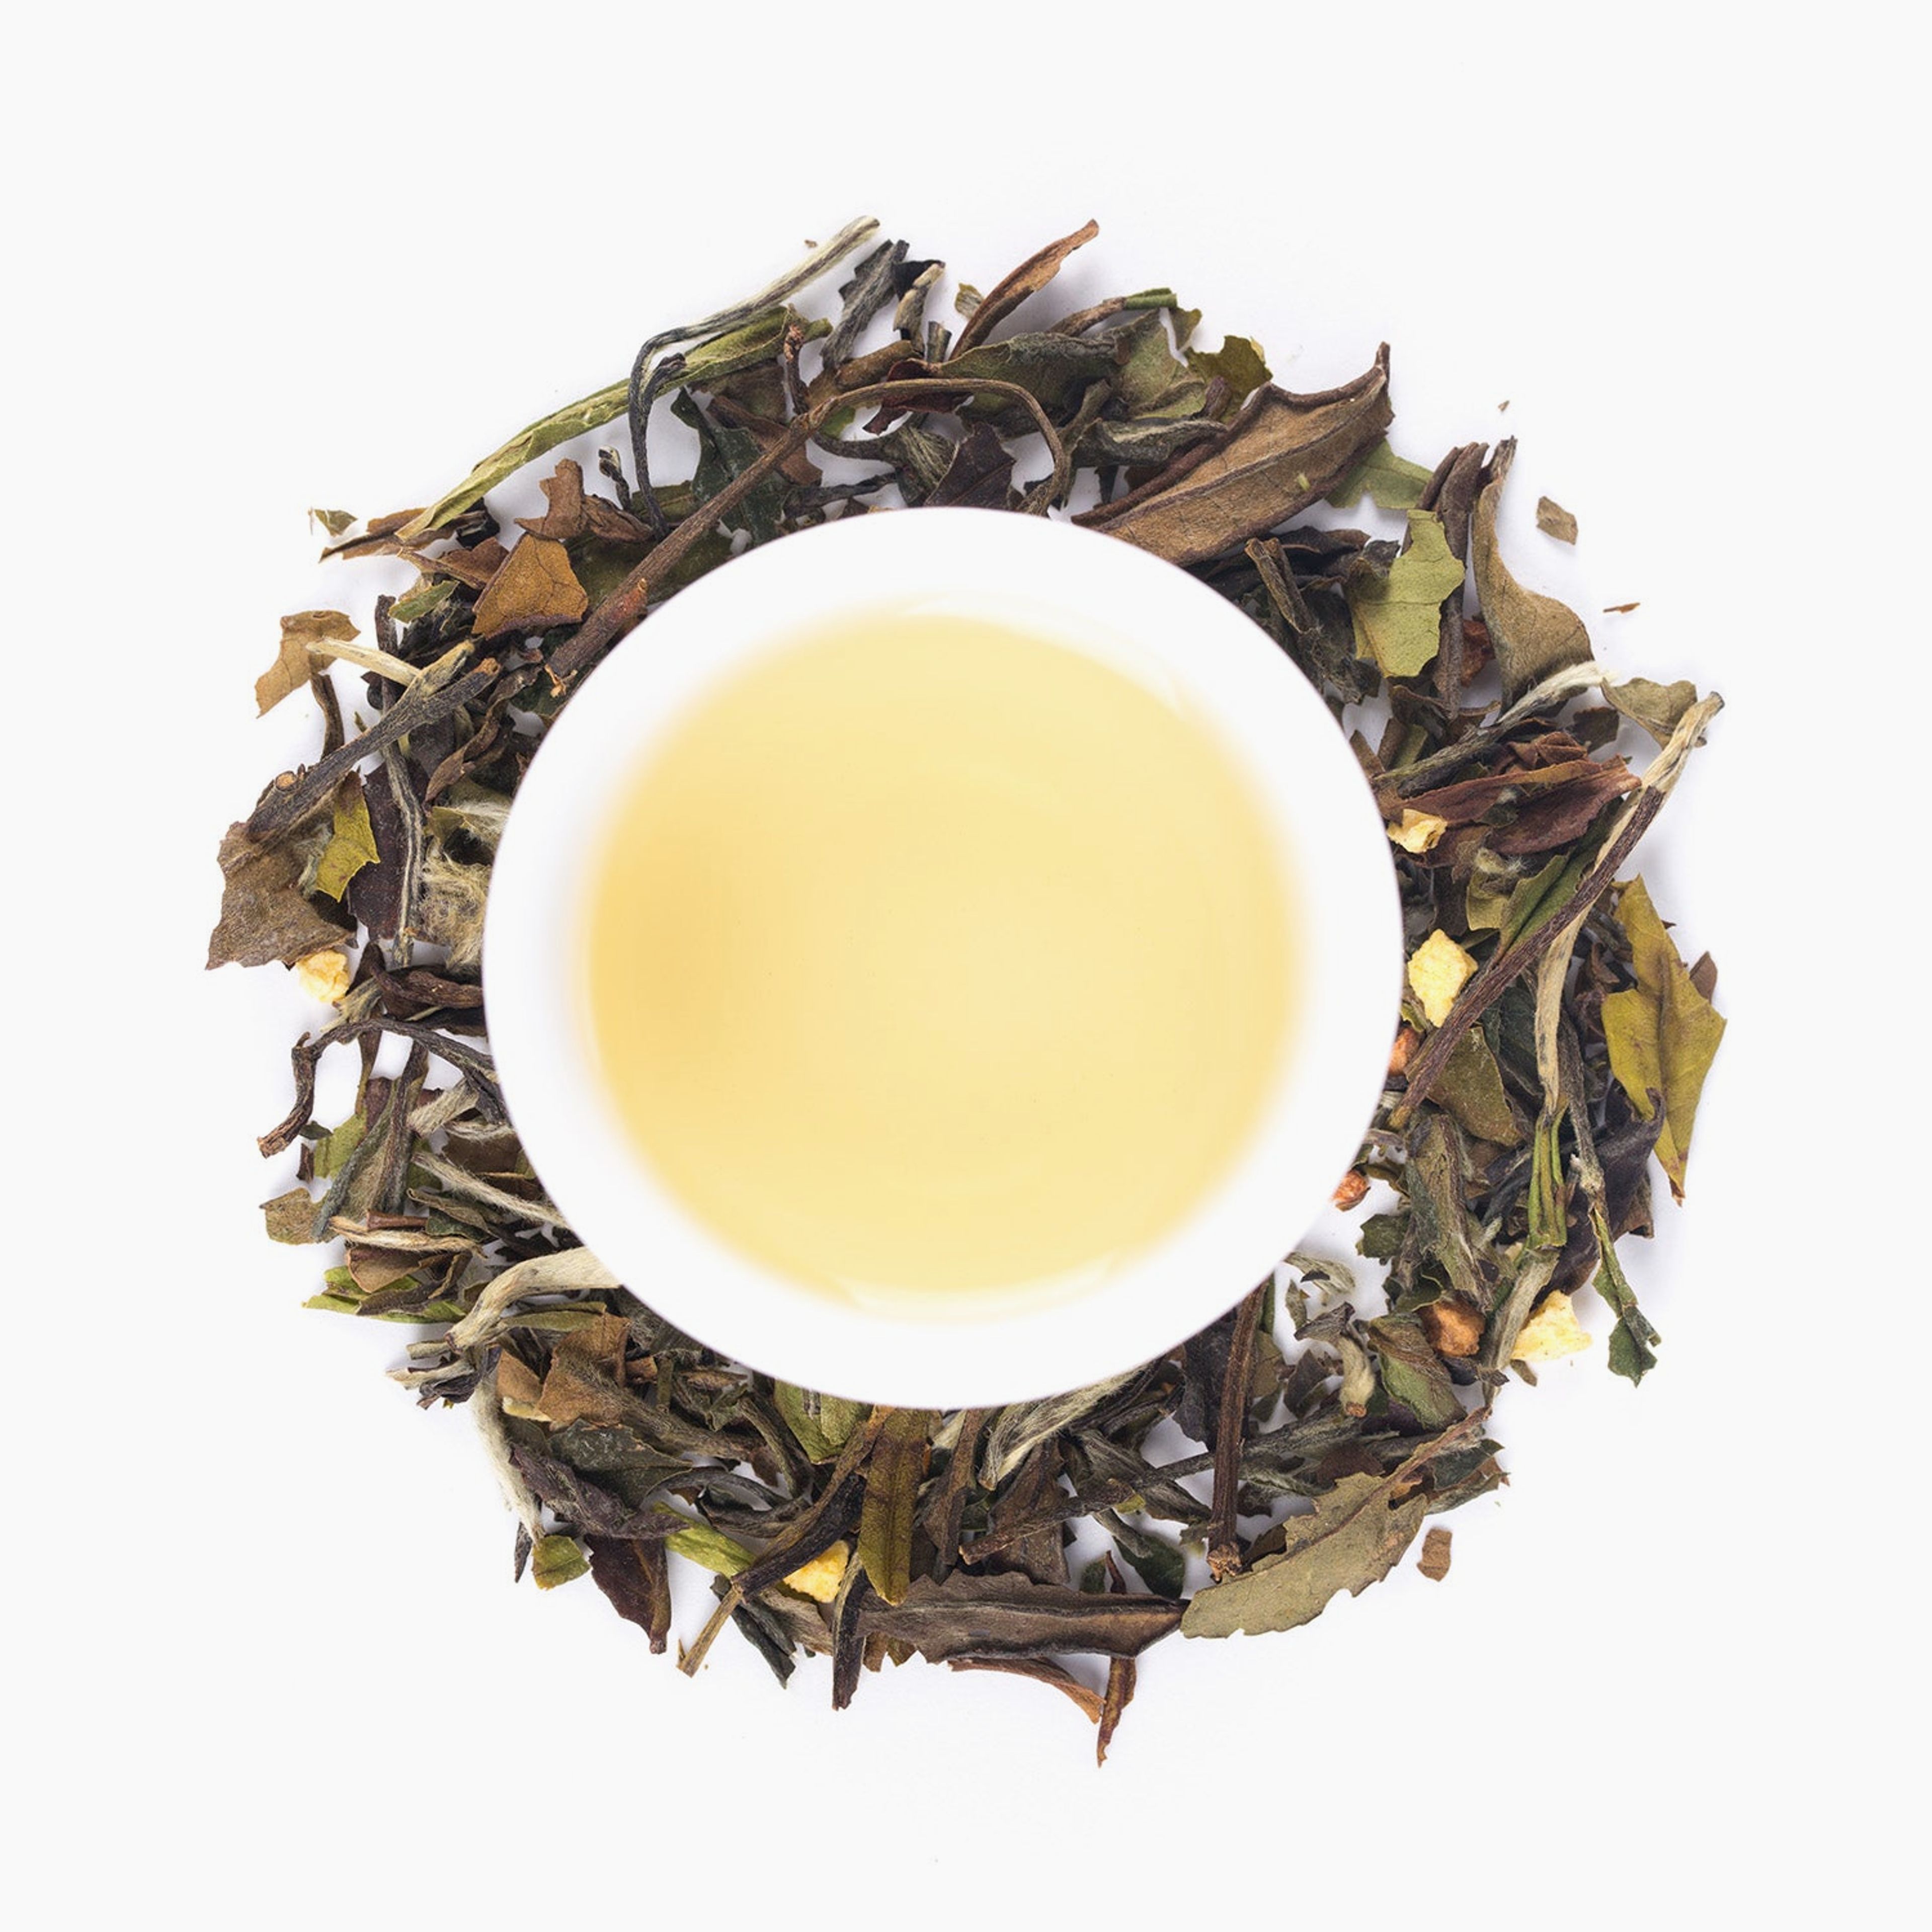 Emperor's Peach - Organic White Tea with Peach and Quince